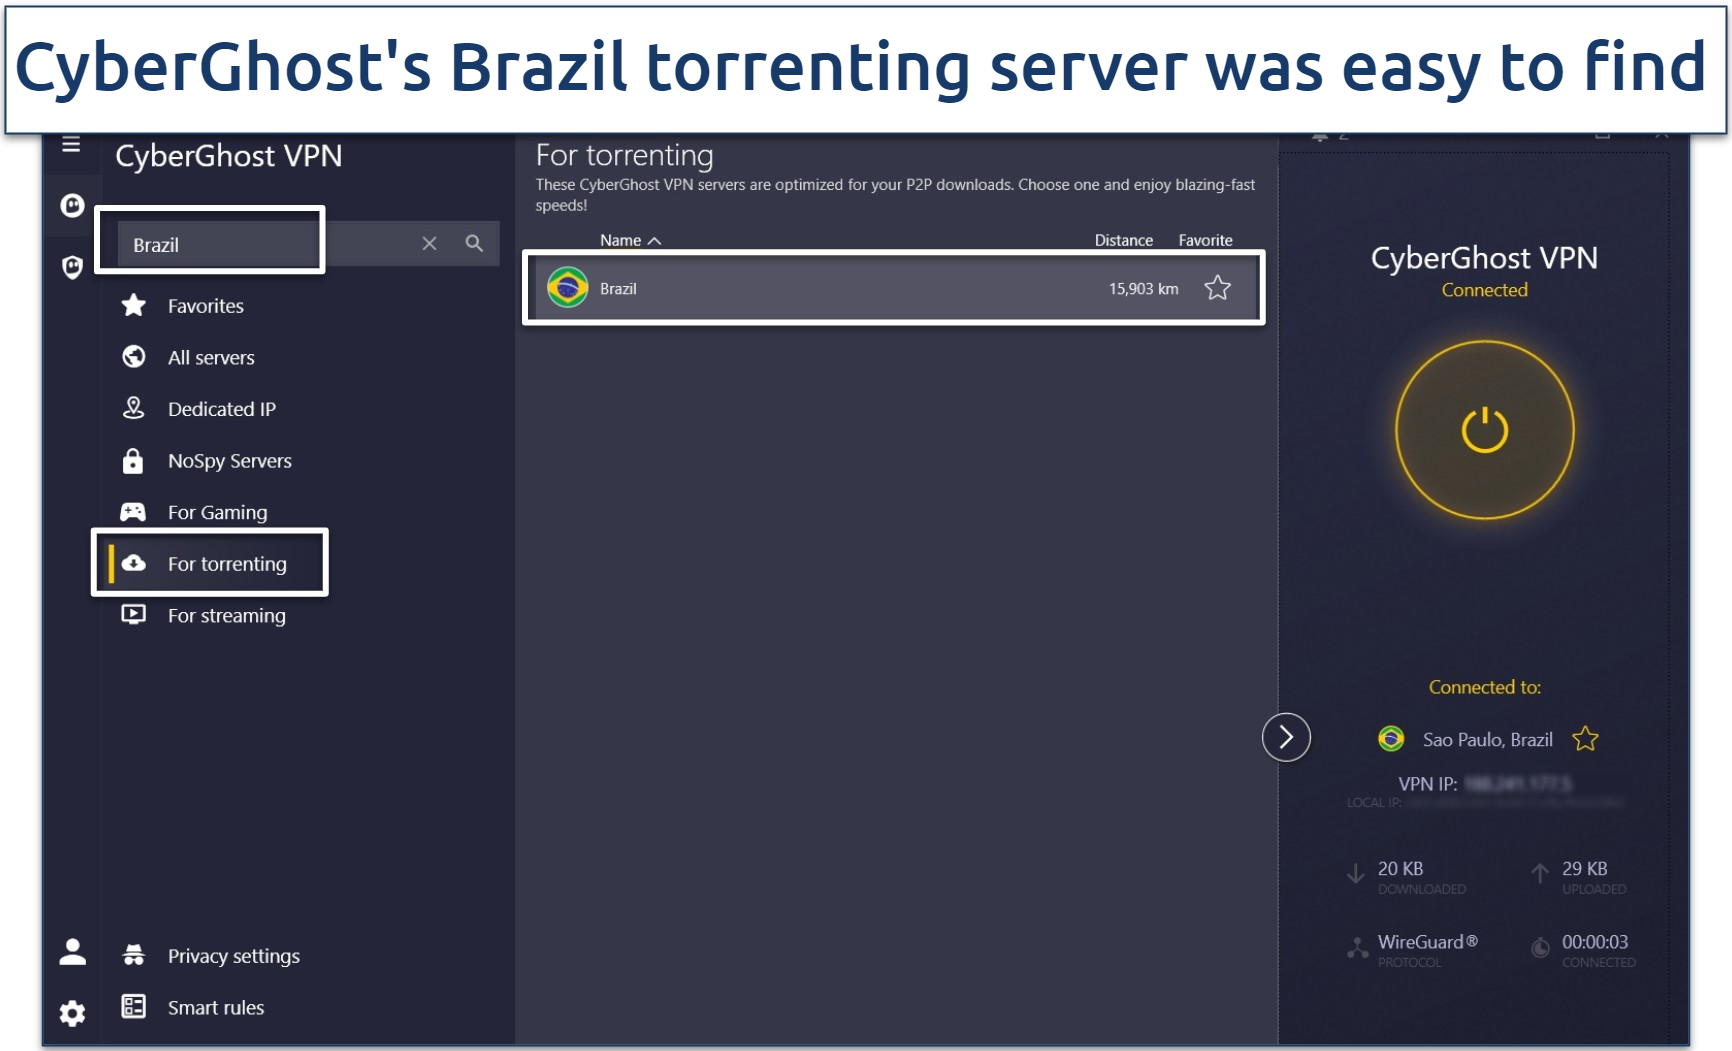 A screenshot of CyberGhost's app interface with its Brazil torrenting servers.